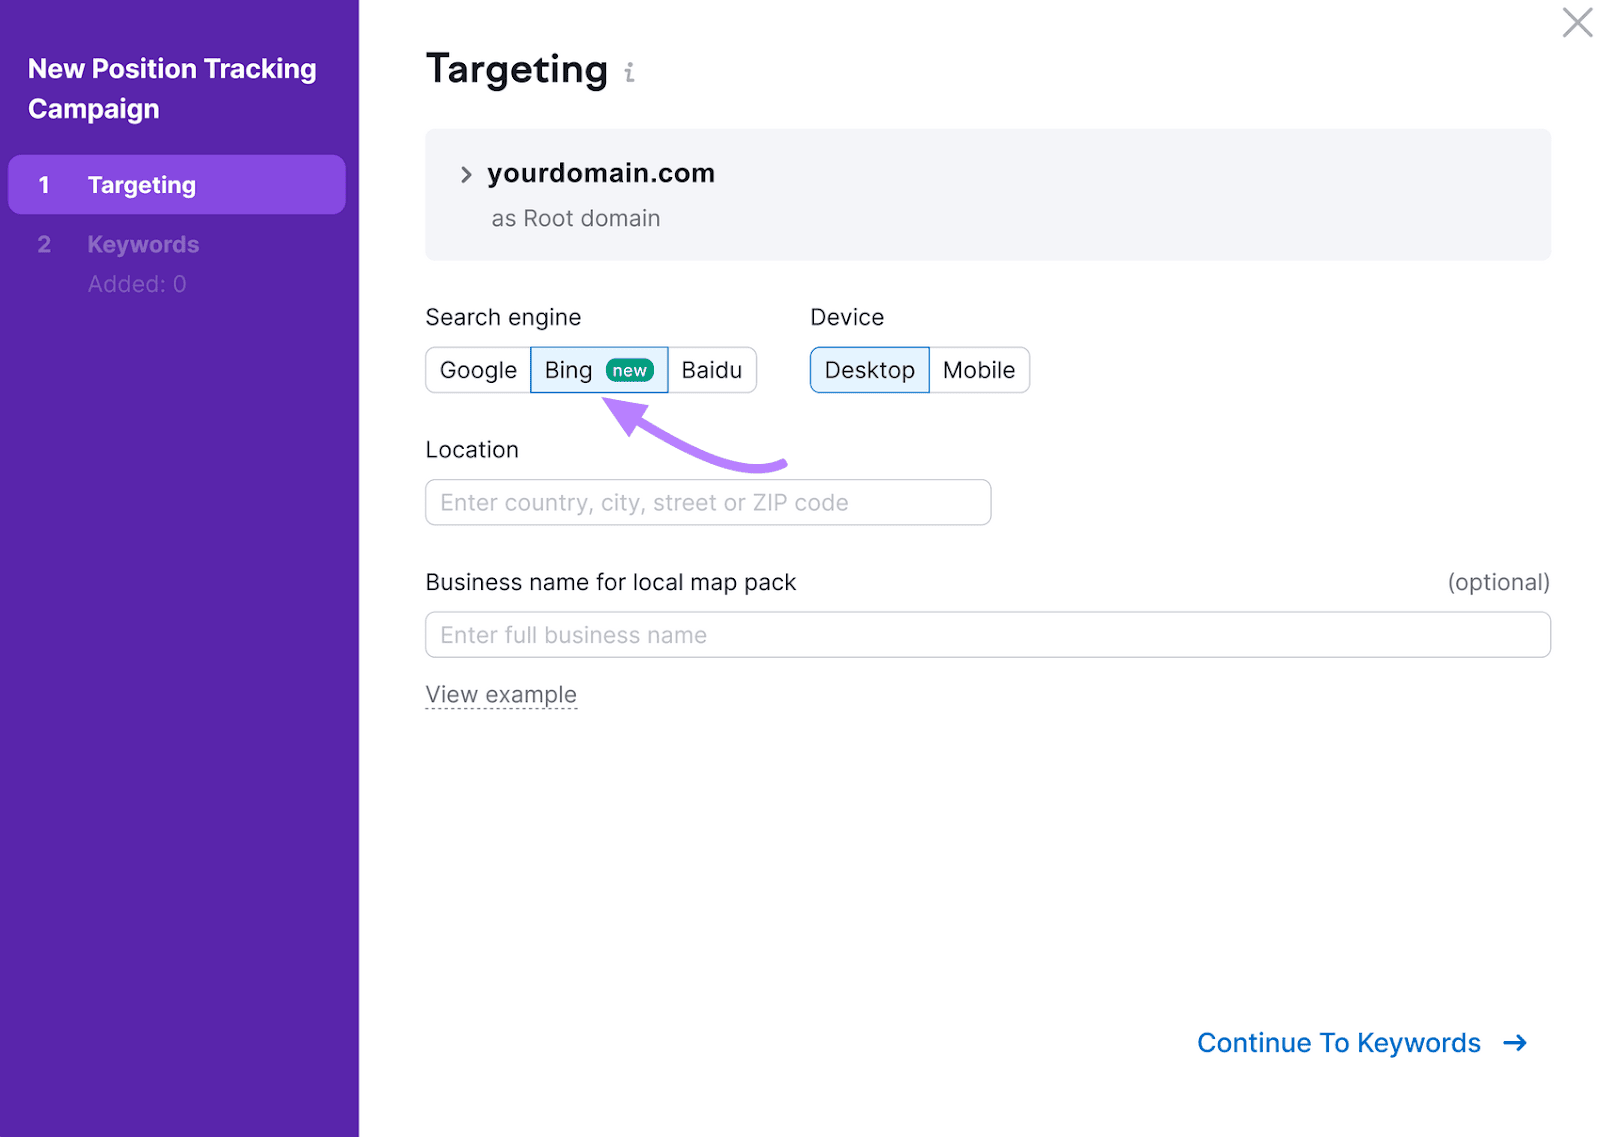 Targeting configuration settings successful  Position Tracking tool